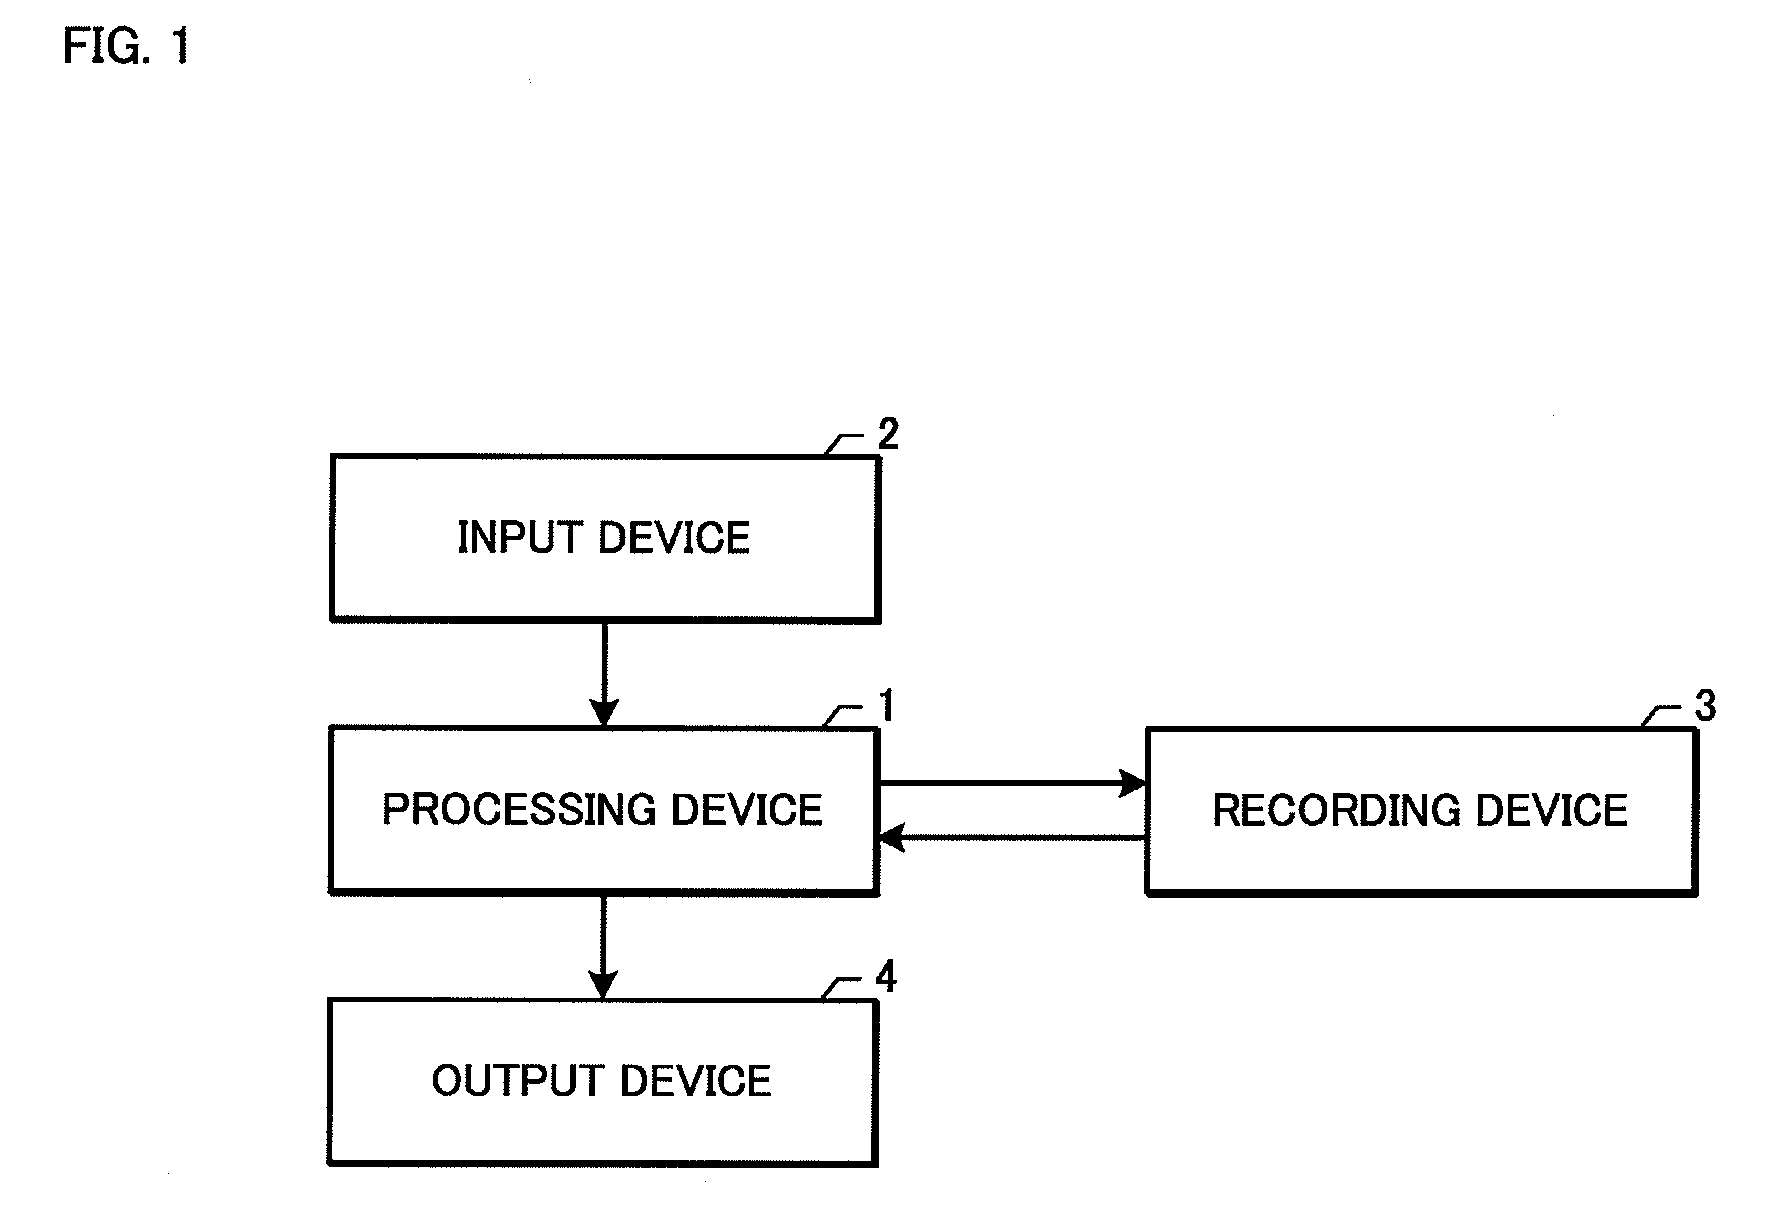 Index term extraction device and document characteristic analysis device for document to be surveyed